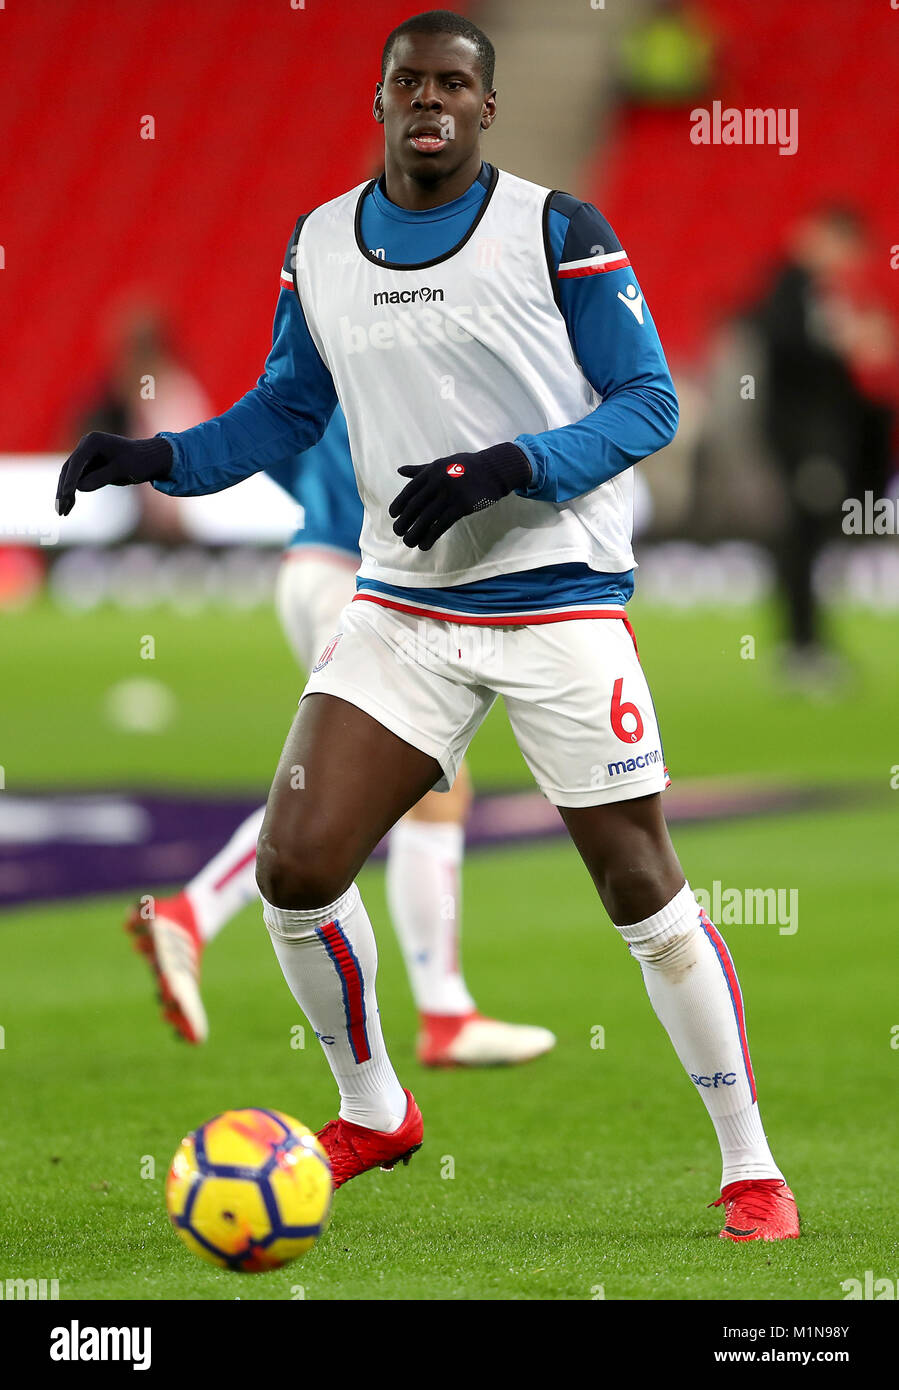 Stoke City's Kurt Zouma during the Premier League match at the bet365 Stadium, Stoke. PRESS ASSOCIATION Photo. Picture date: Wednesday January 31, 2018. See PA story SOCCER Stoke. Photo credit should read: David Davies/PA Wire. RESTRICTIONS: No use with unauthorised audio, video, data, fixture lists, club/league logos or 'live' services. Online in-match use limited to 75 images, no video emulation. No use in betting, games or single club/league/player publications. Stock Photo